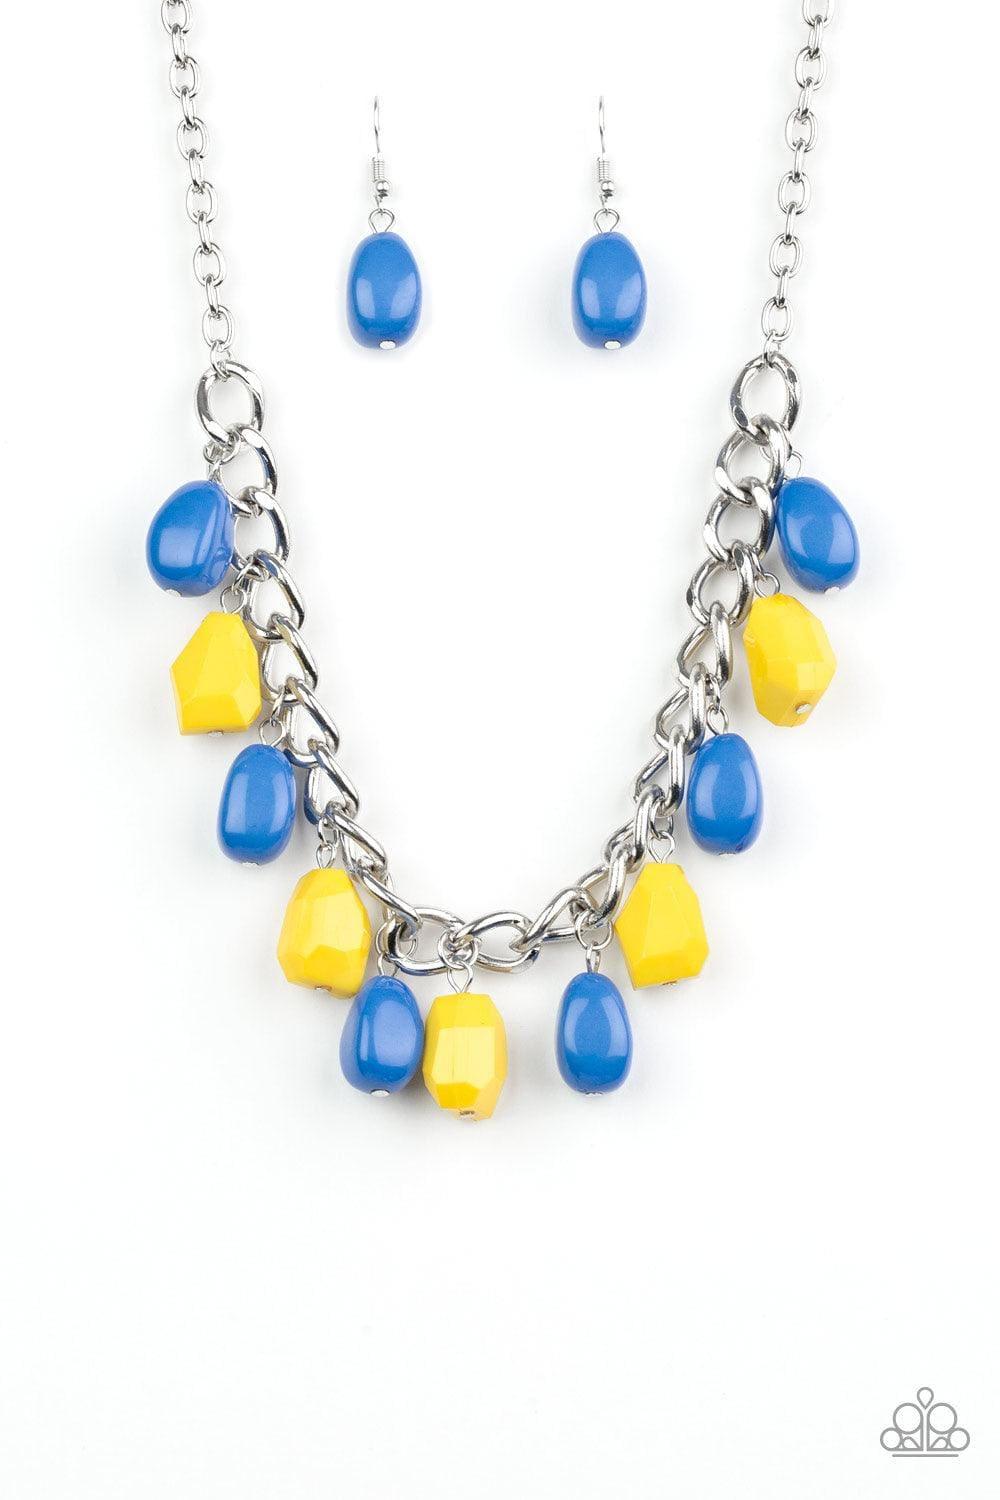 Paparazzi Accessories - Take The Color Wheel! - Multicolor Necklace - Bling by JessieK